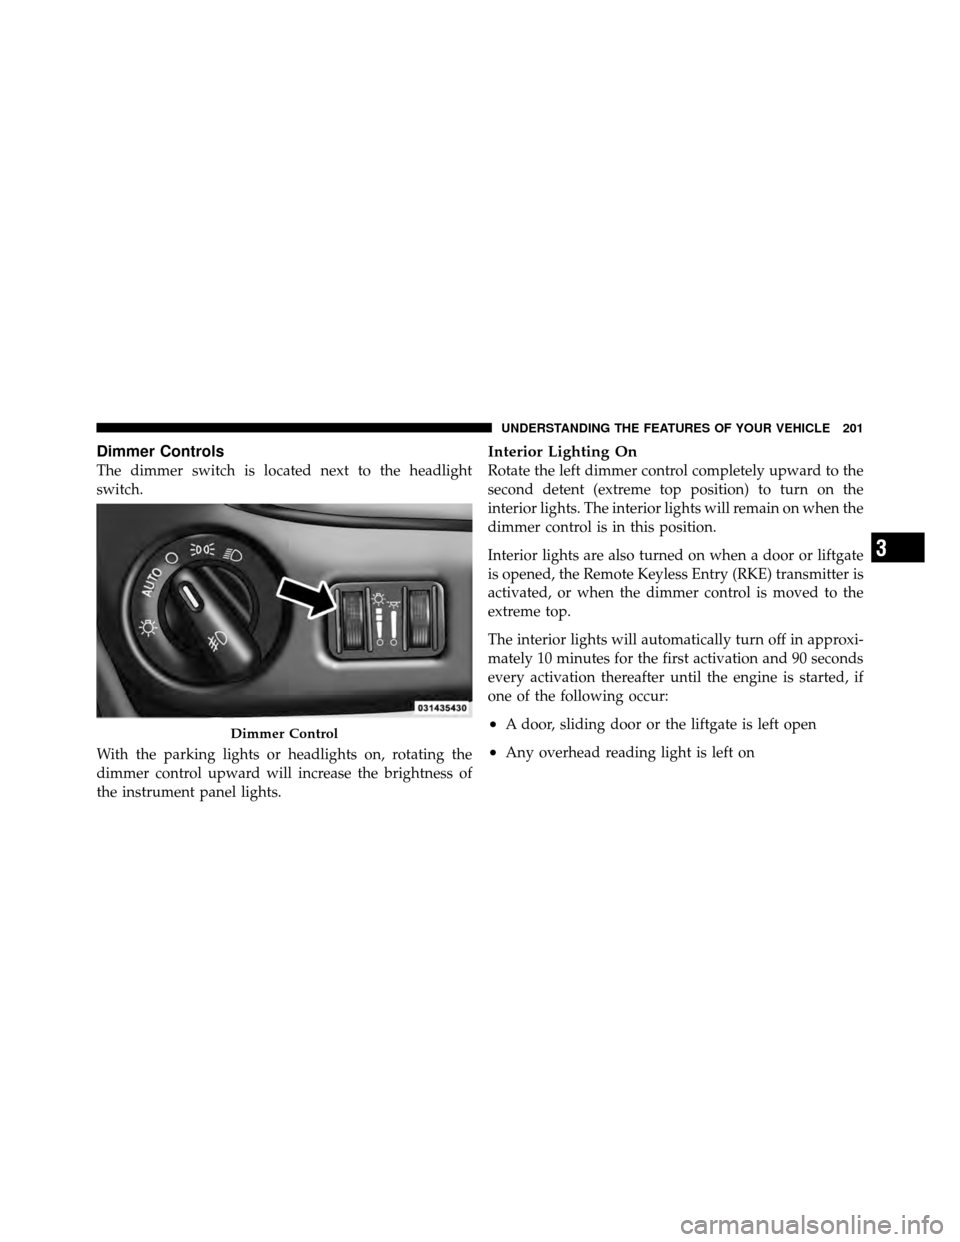 DODGE GRAND CARAVAN 2012 5.G Owners Manual Dimmer Controls
The dimmer switch is located next to the headlight
switch.
With the parking lights or headlights on, rotating the
dimmer control upward will increase the brightness of
the instrument p